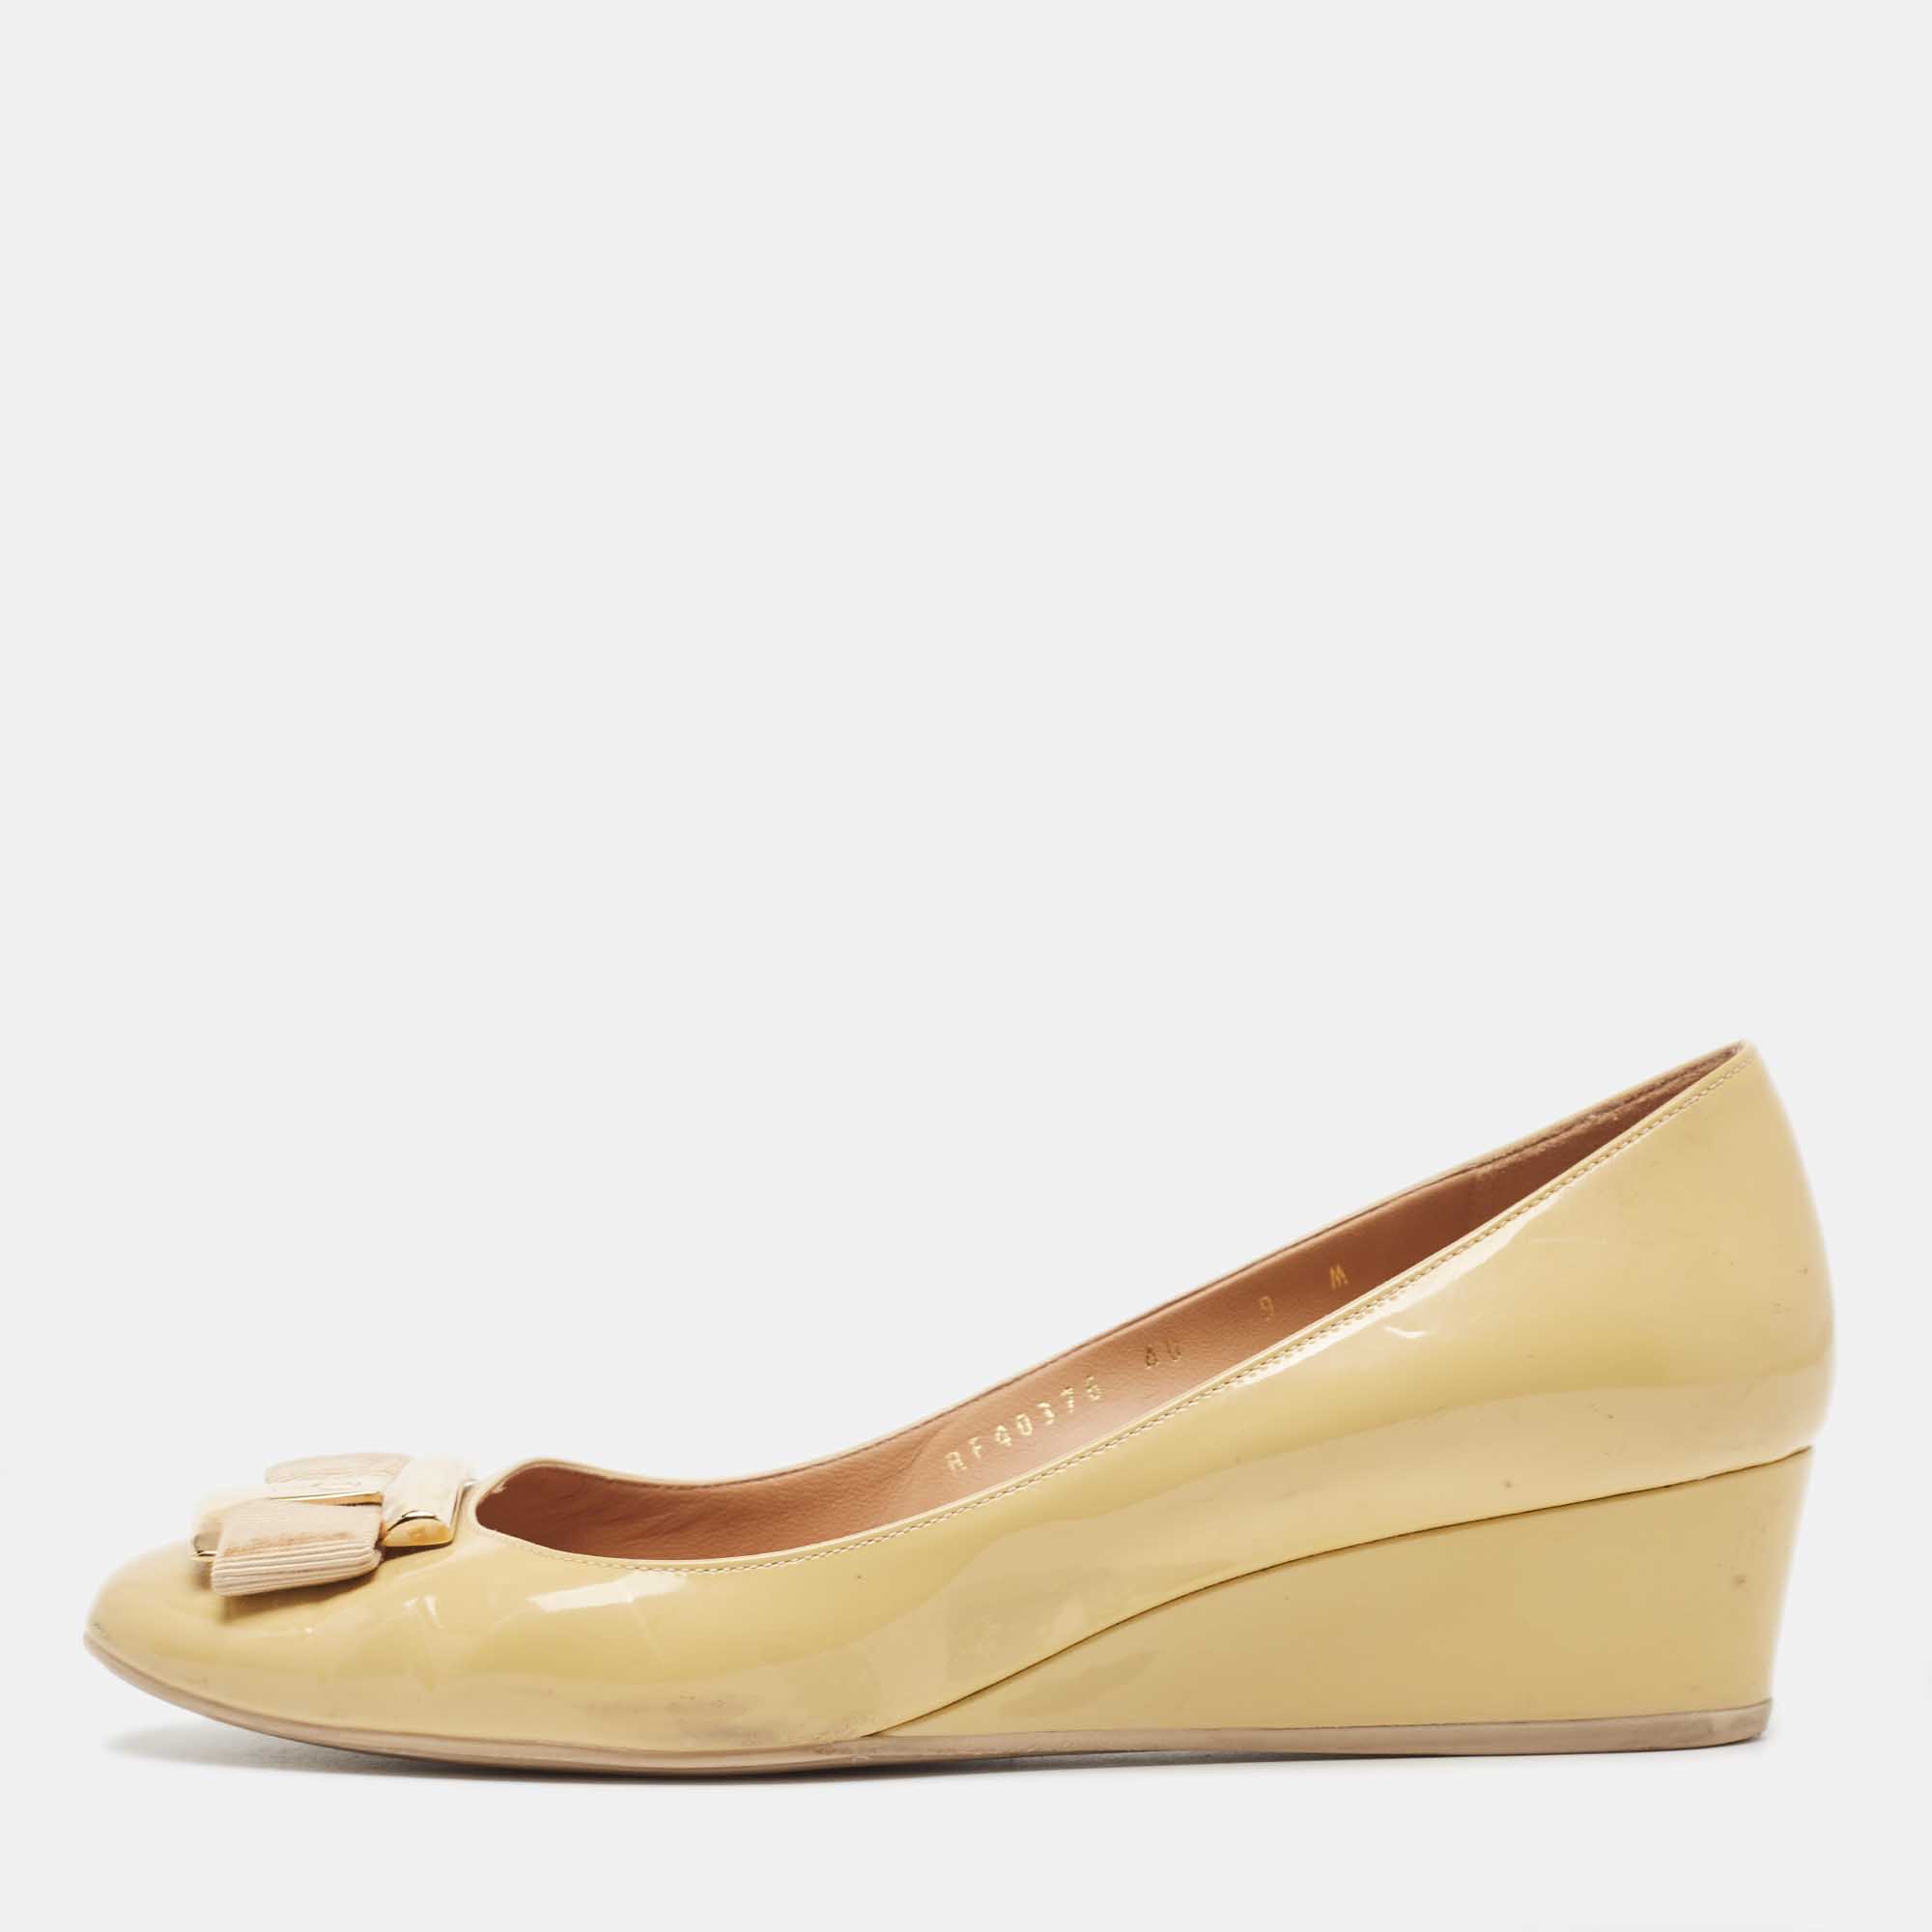 Pre-owned Ferragamo Beige Patent Leather Vara Bow Wedge Pumps Size 39.5